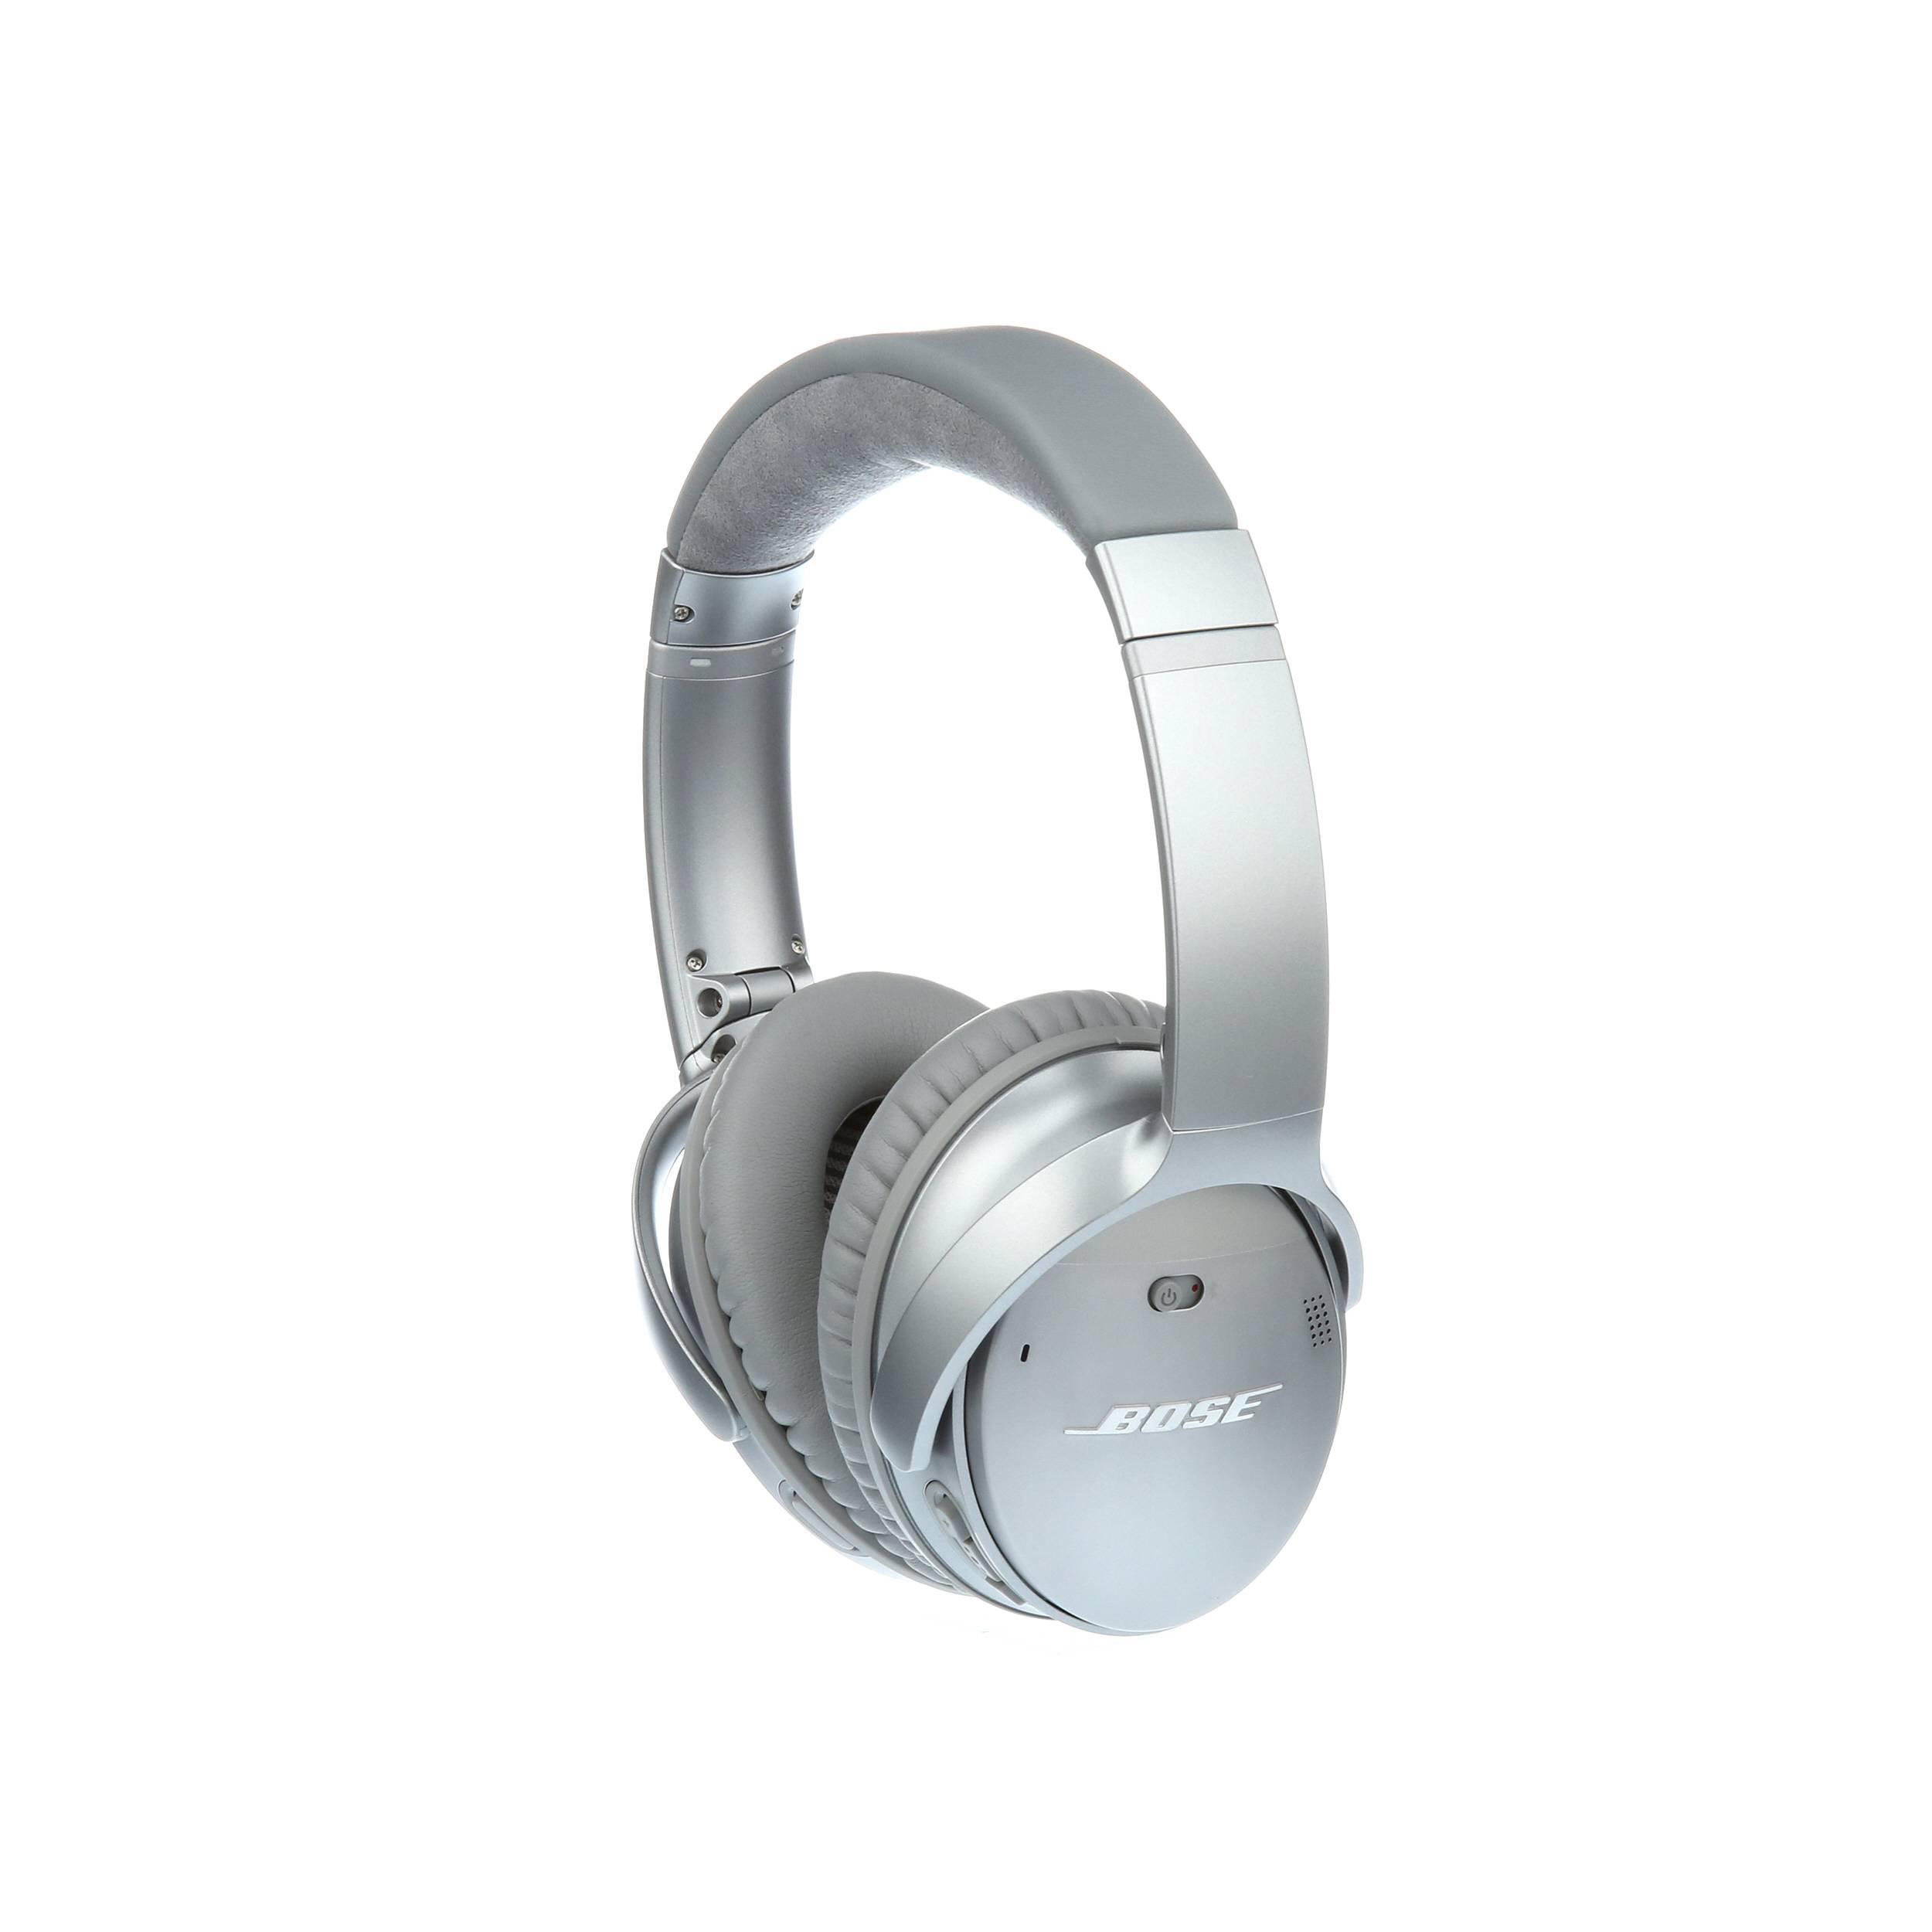  Bose QuietComfort 35 II Noise Cancelling Bluetooth  Headphonesâ€” Wireless, Over Ear Headphones with Built in Microphone and  Alexa Voice Control, Silver : Electronics